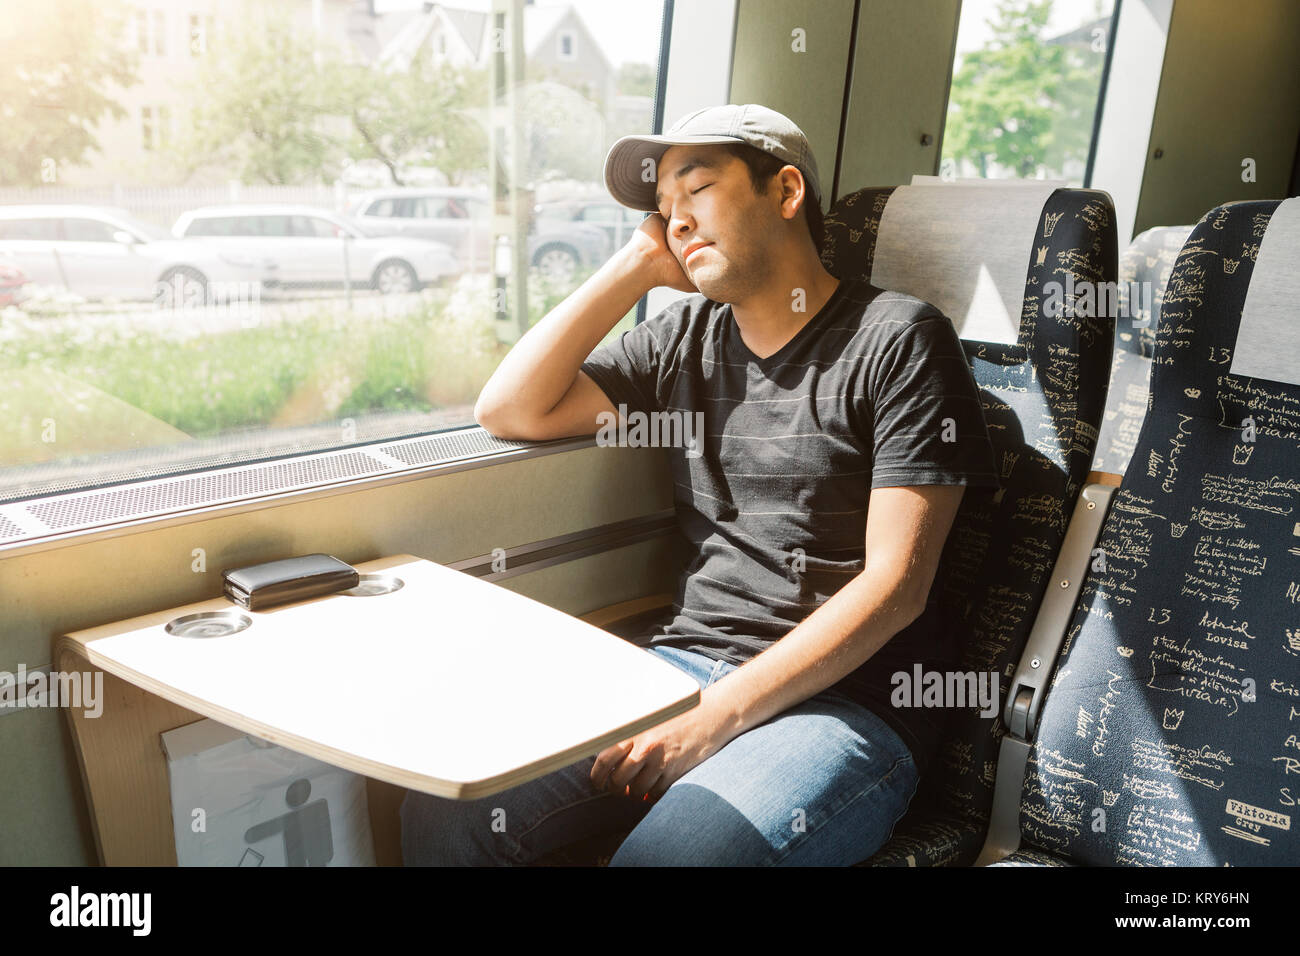 Man sleeping on train Banque D'Images